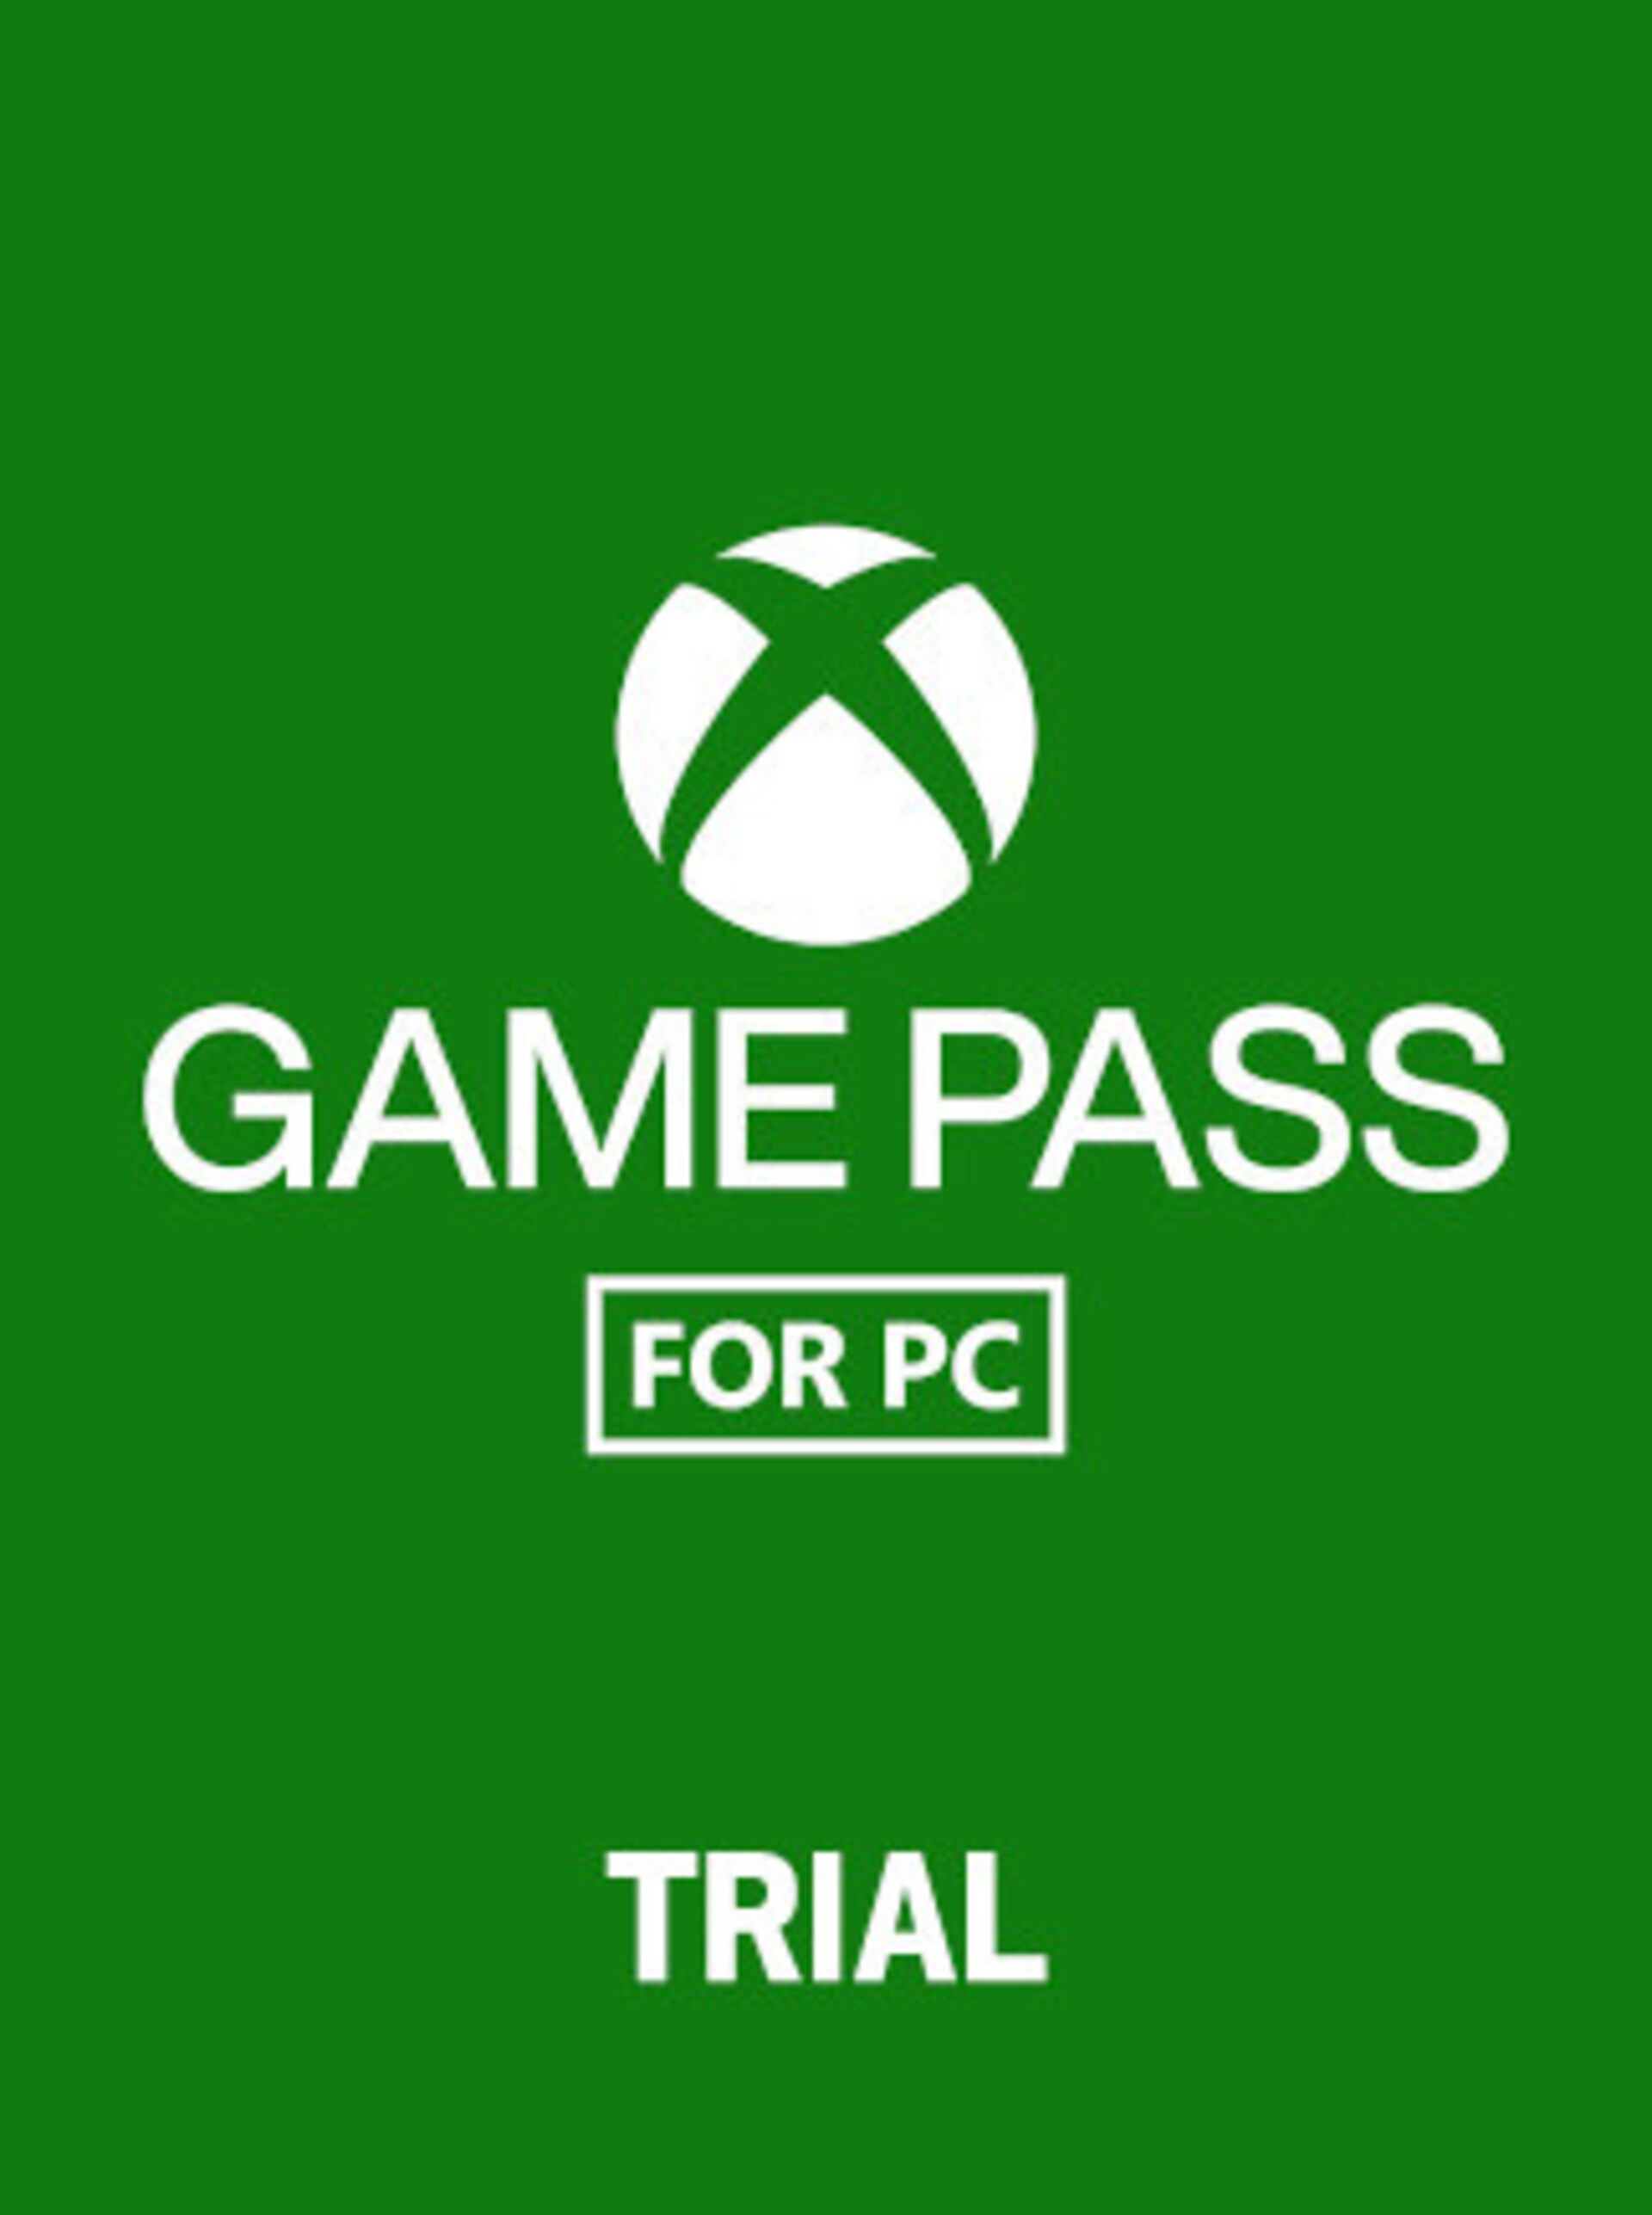 EA Play Now Available on Xbox Game Pass for PC - Niche Gamer